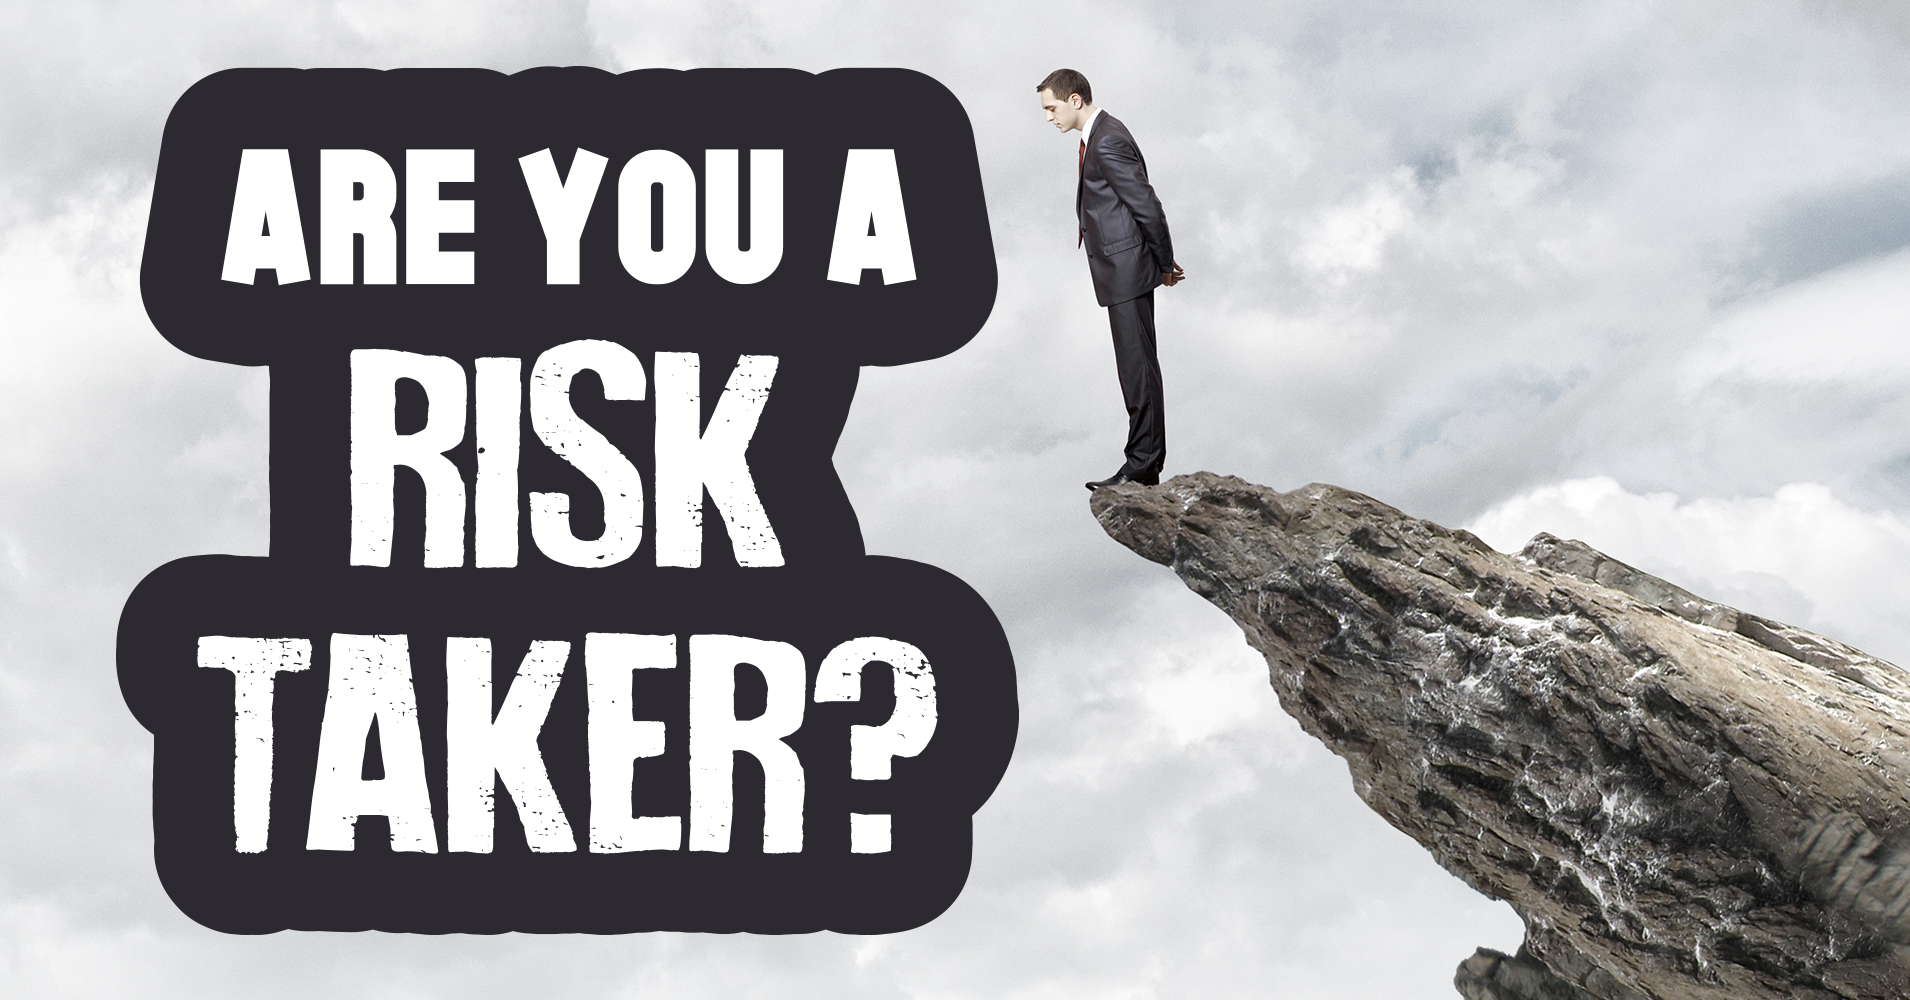 Life is risk. Taking risks. Risk Taker. Риск картинки. Are you a risk Taker.